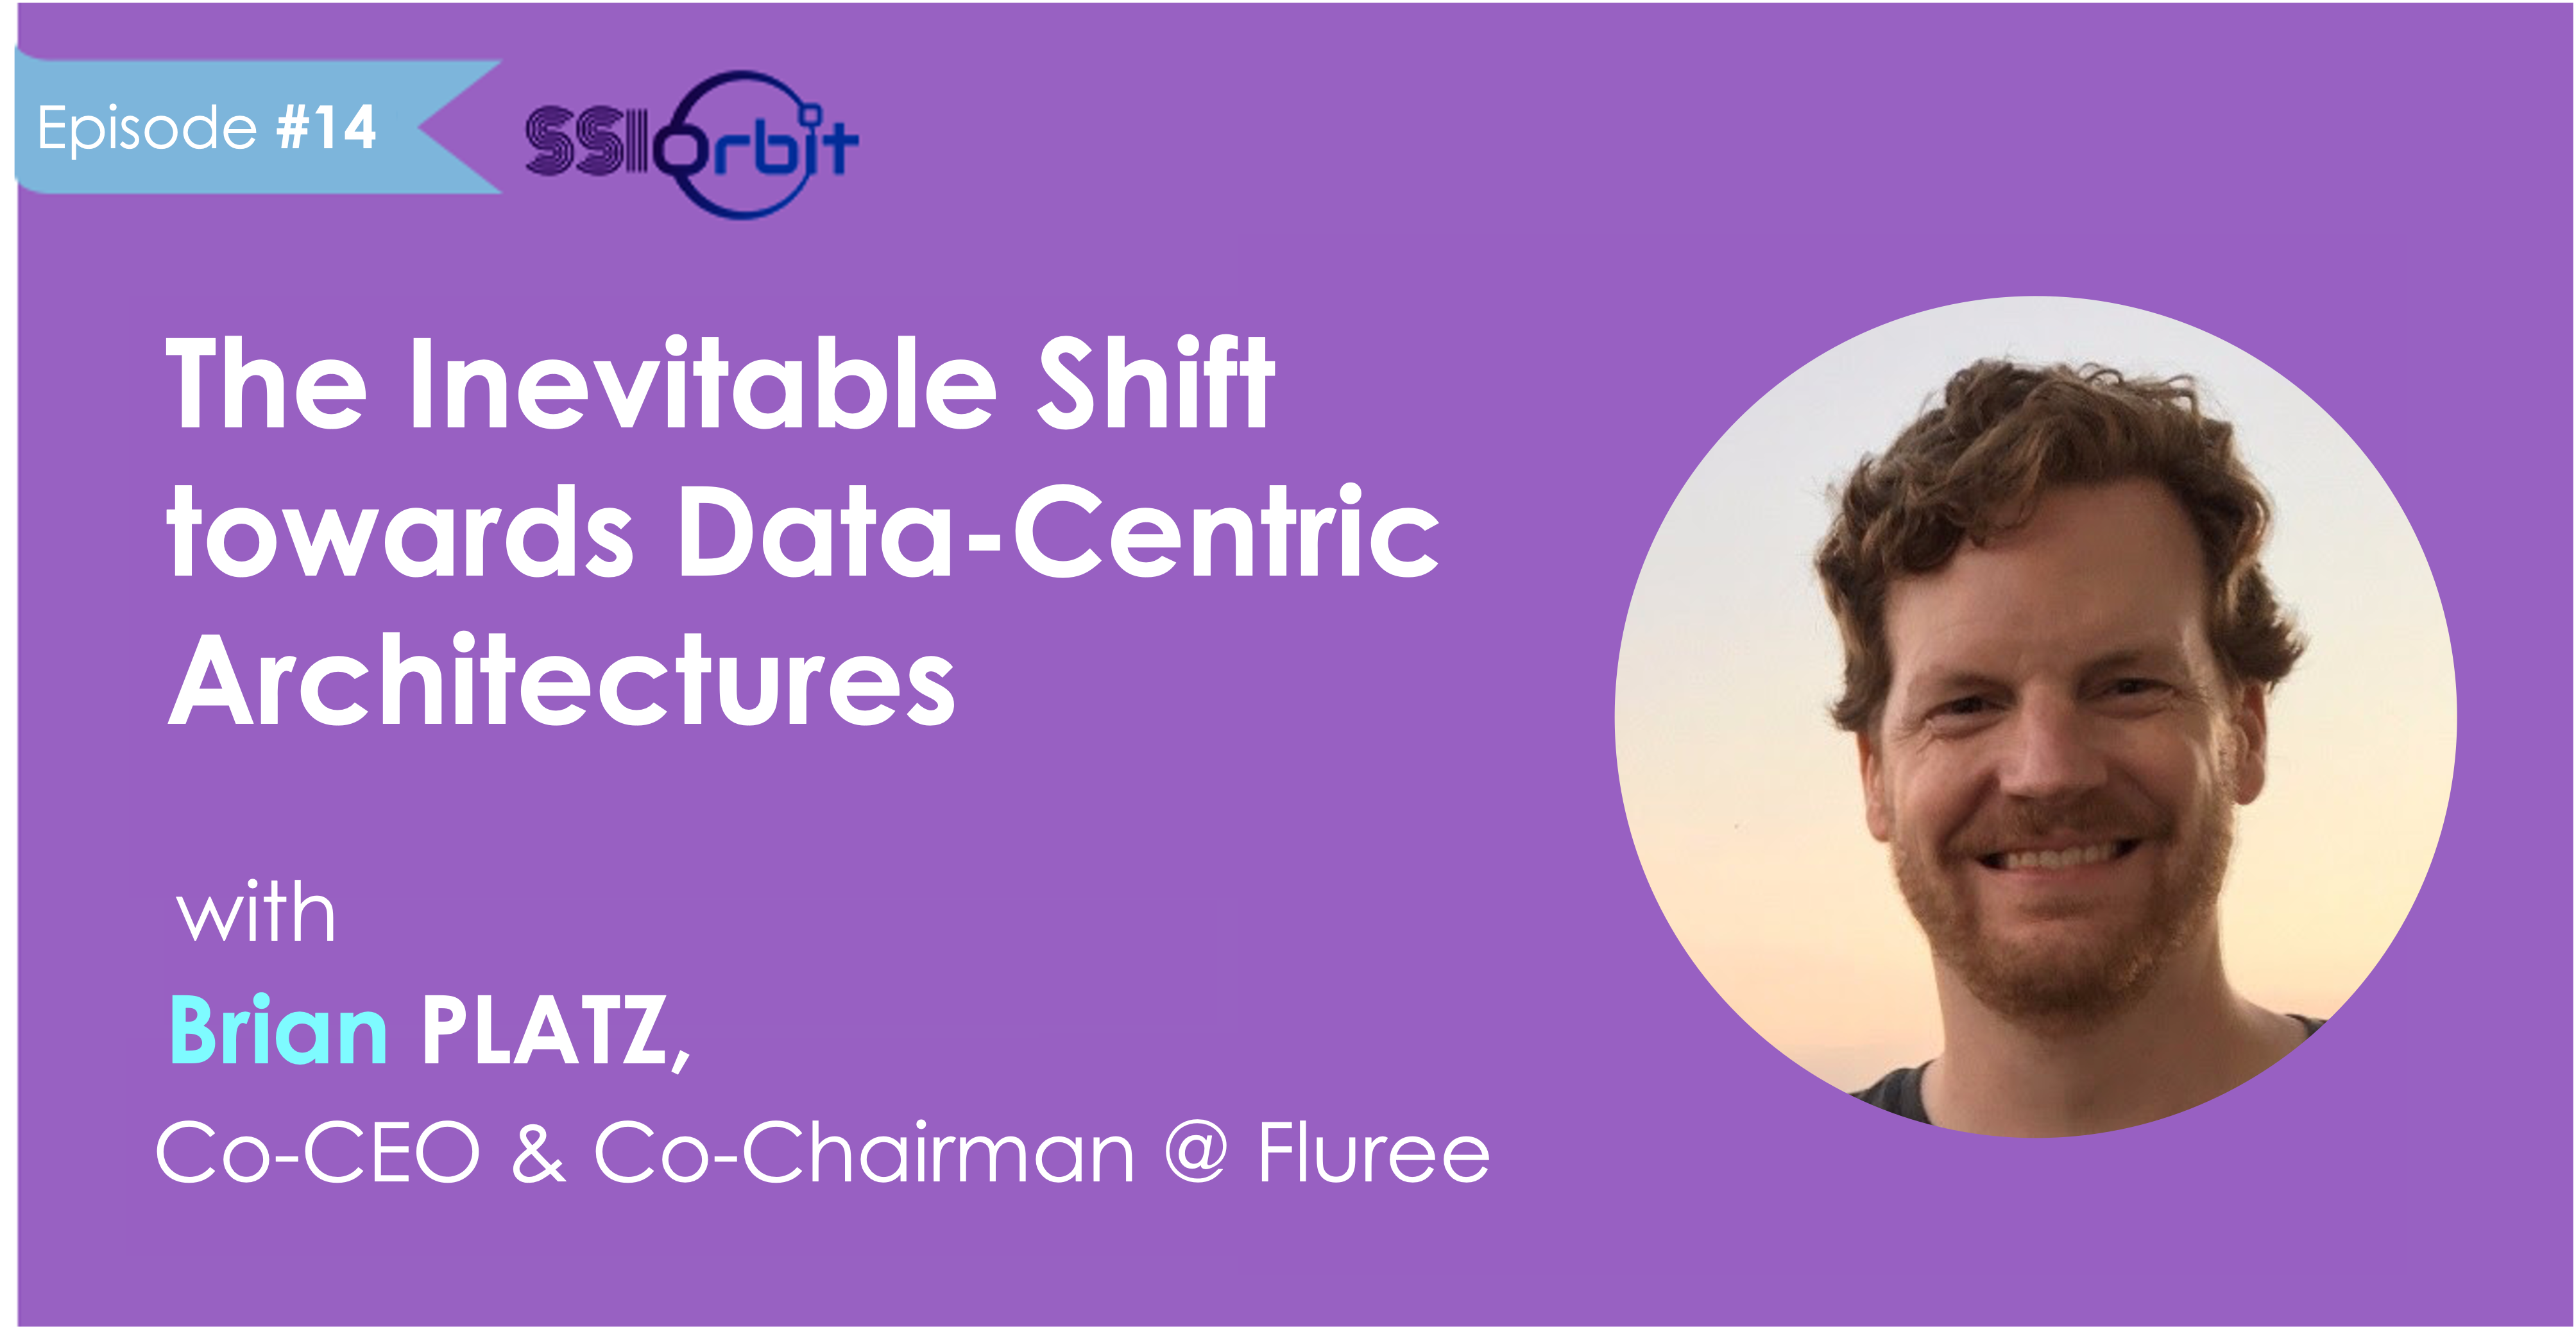 The Inevitable Shift towards Data-Centric Architectures with Brian Platz